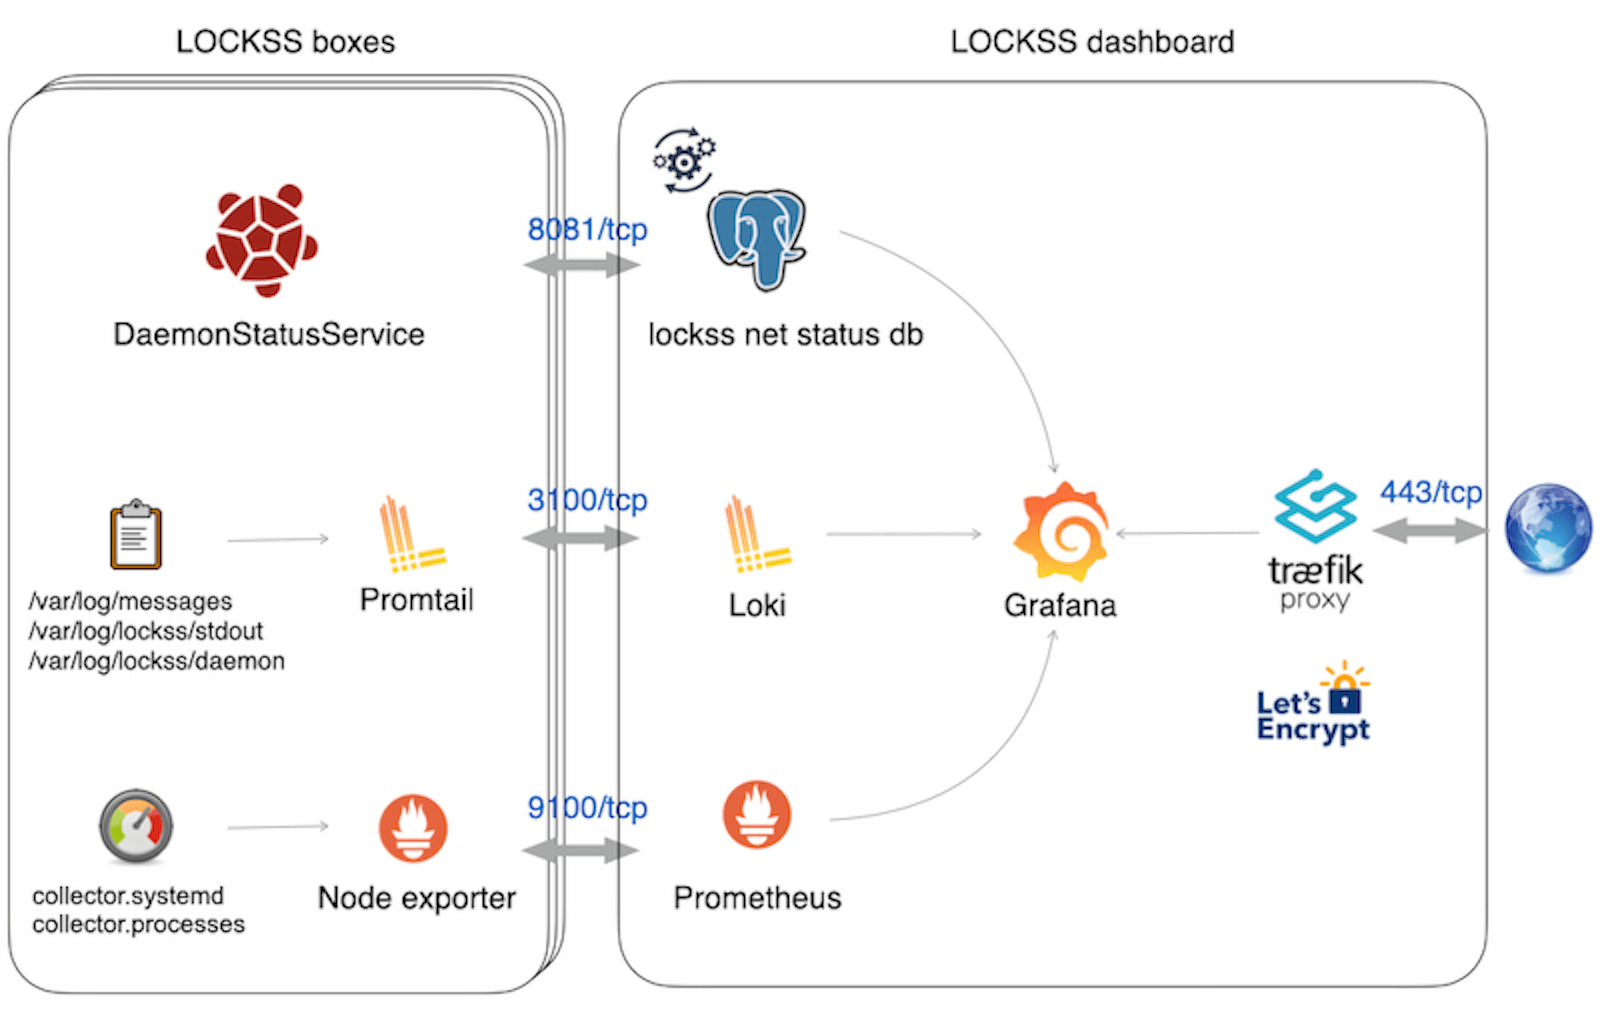 A chart showing the architecture of LOCKSS boxes and the LOCKSS dashboard